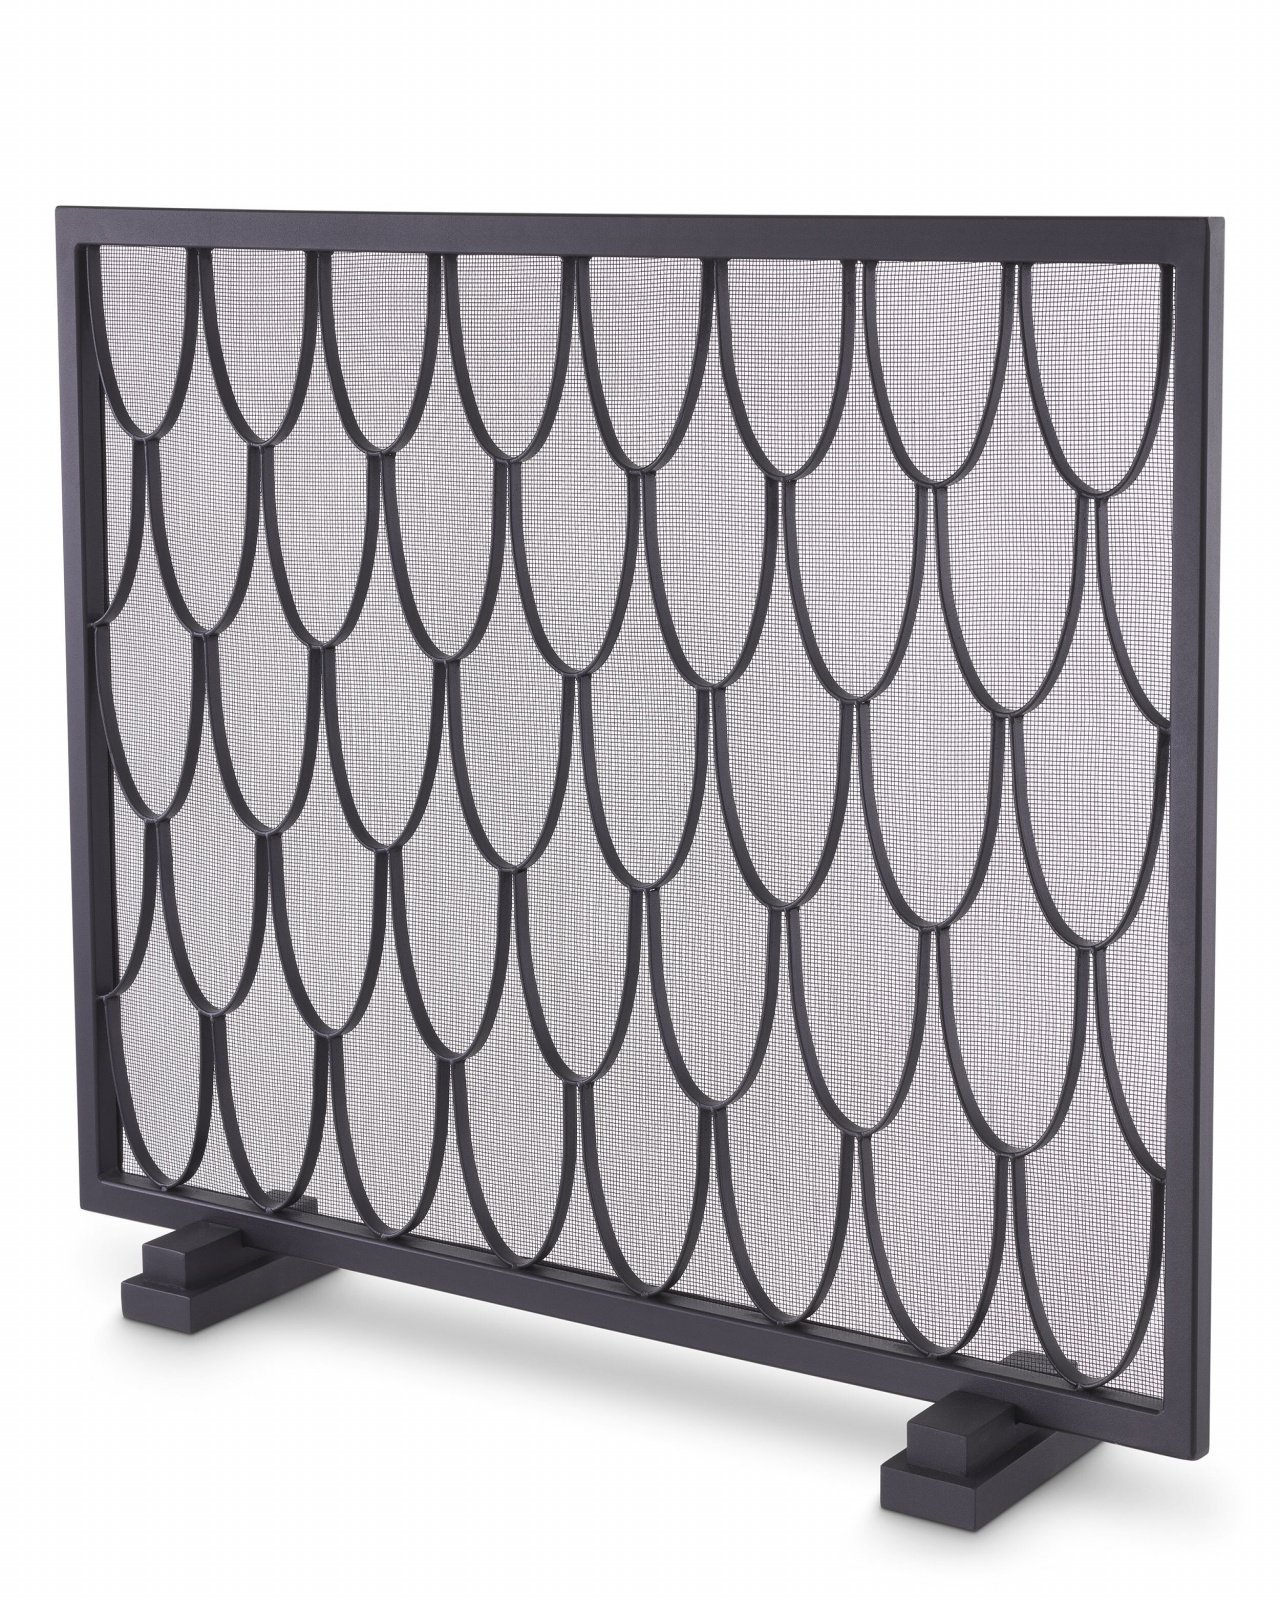 Fire Screen Valois OUTLET